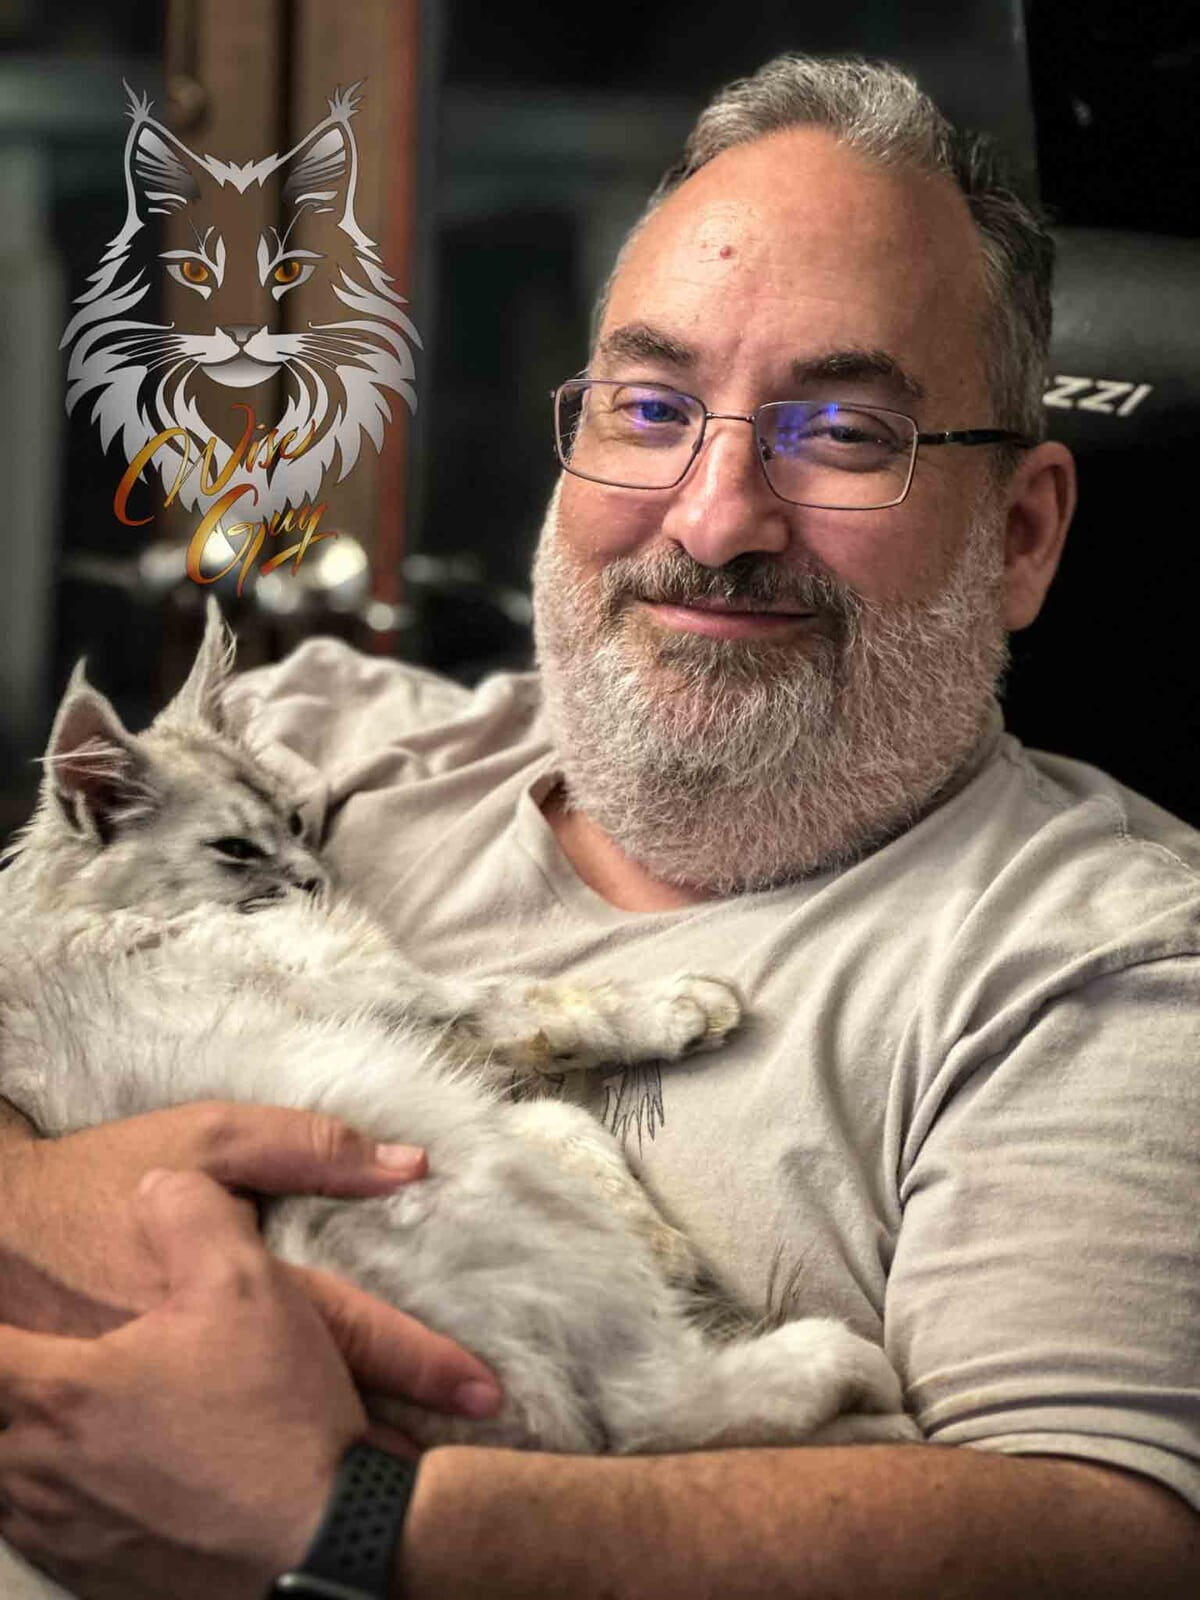 A person in a grey t-shirt, with a beard, holding a relaxed white cat, with a detailed illustration of a cat’s face floating above.